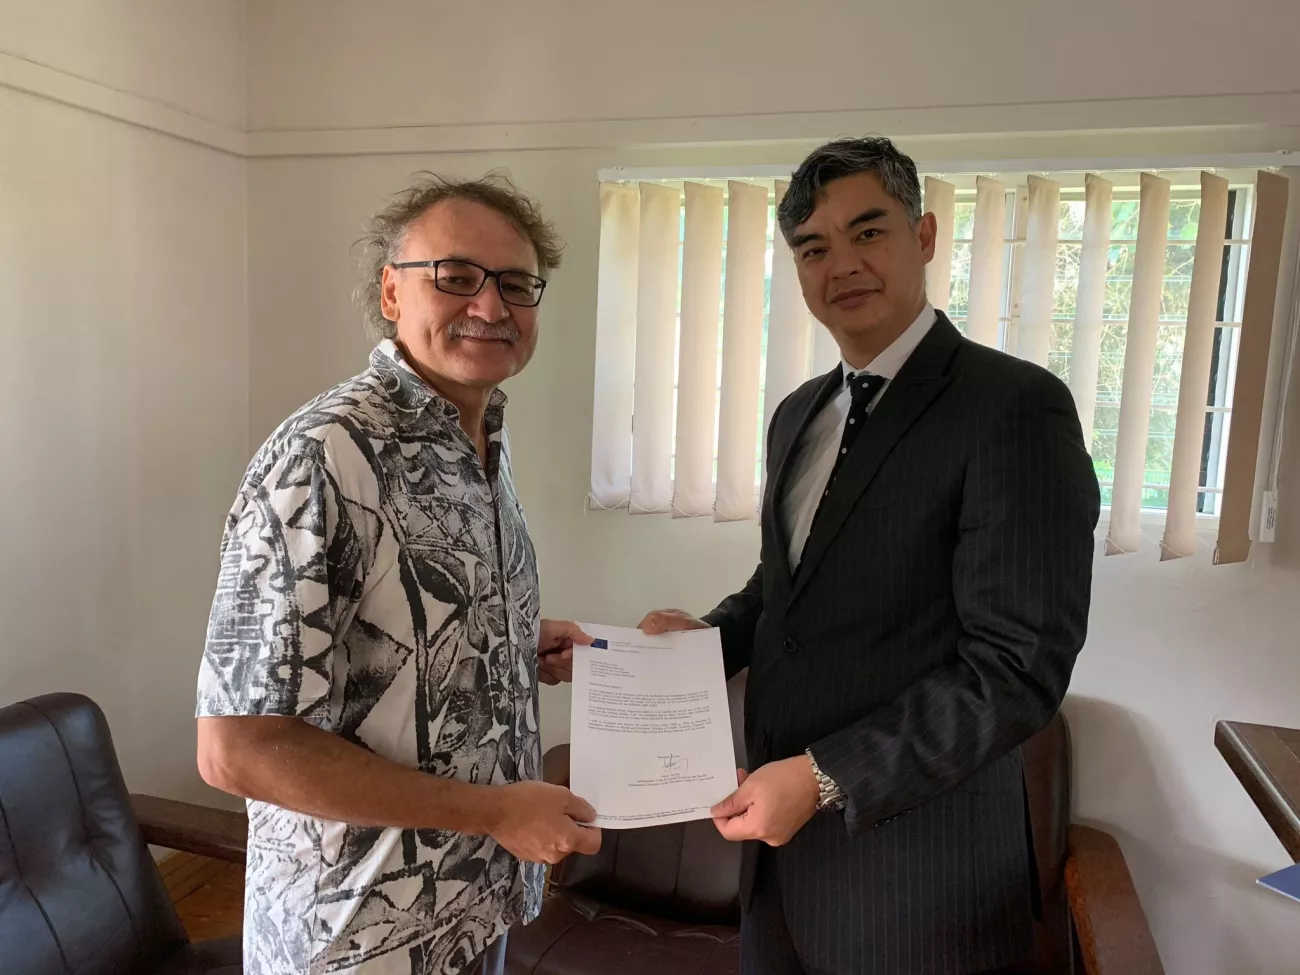 Diplomatic Envoys for Germany and the European Union to visit Cook Islands